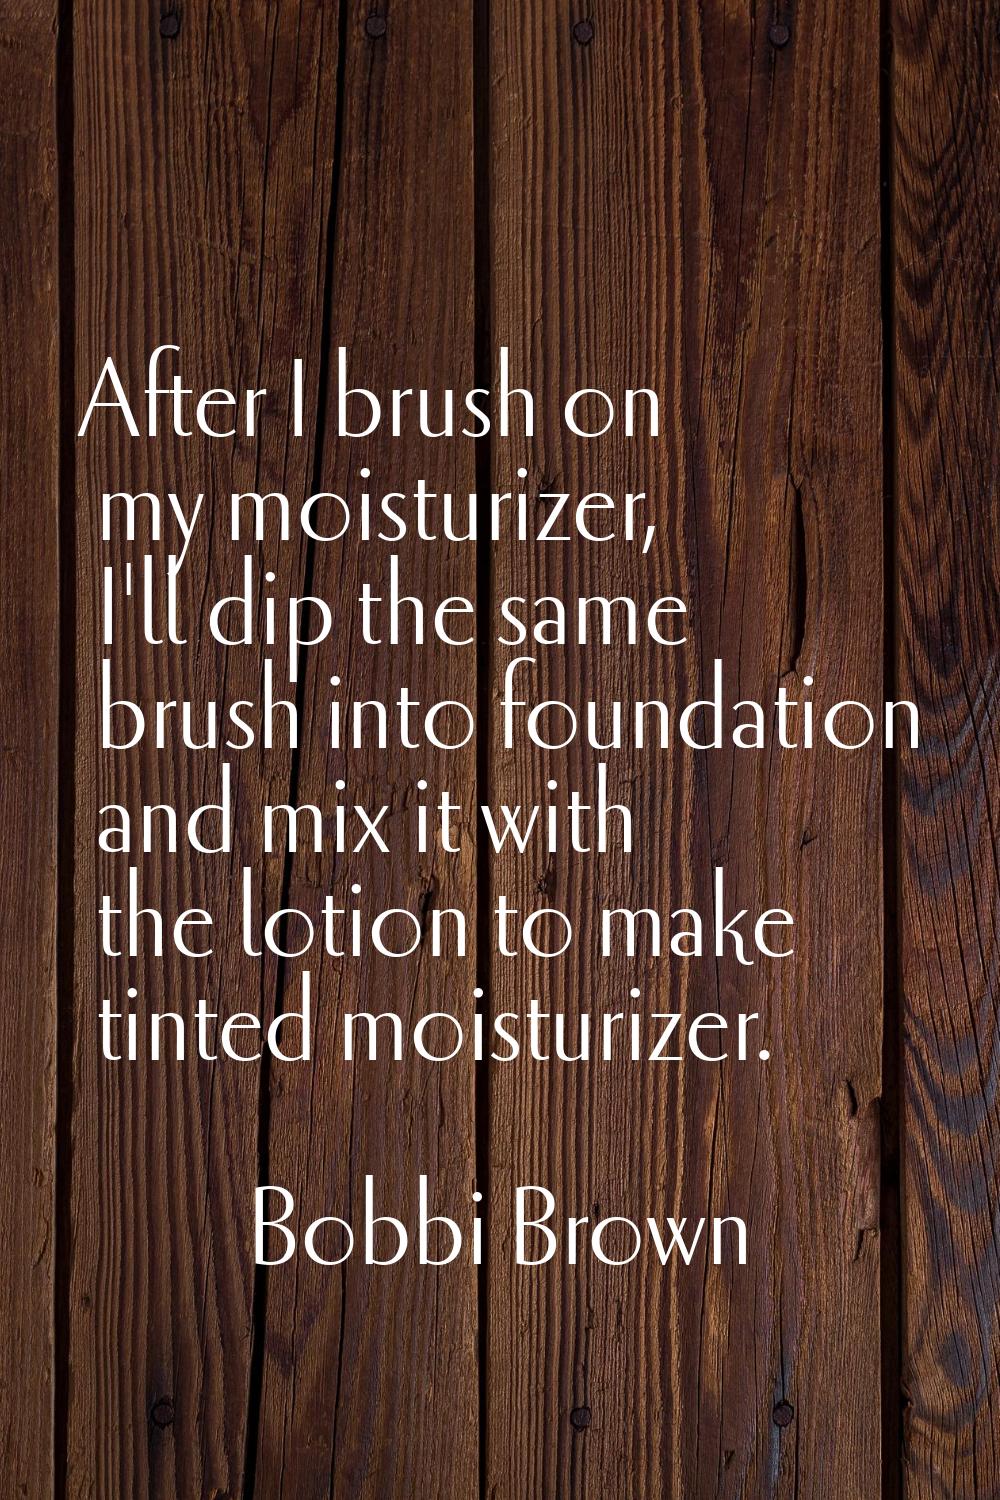 After I brush on my moisturizer, I'll dip the same brush into foundation and mix it with the lotion